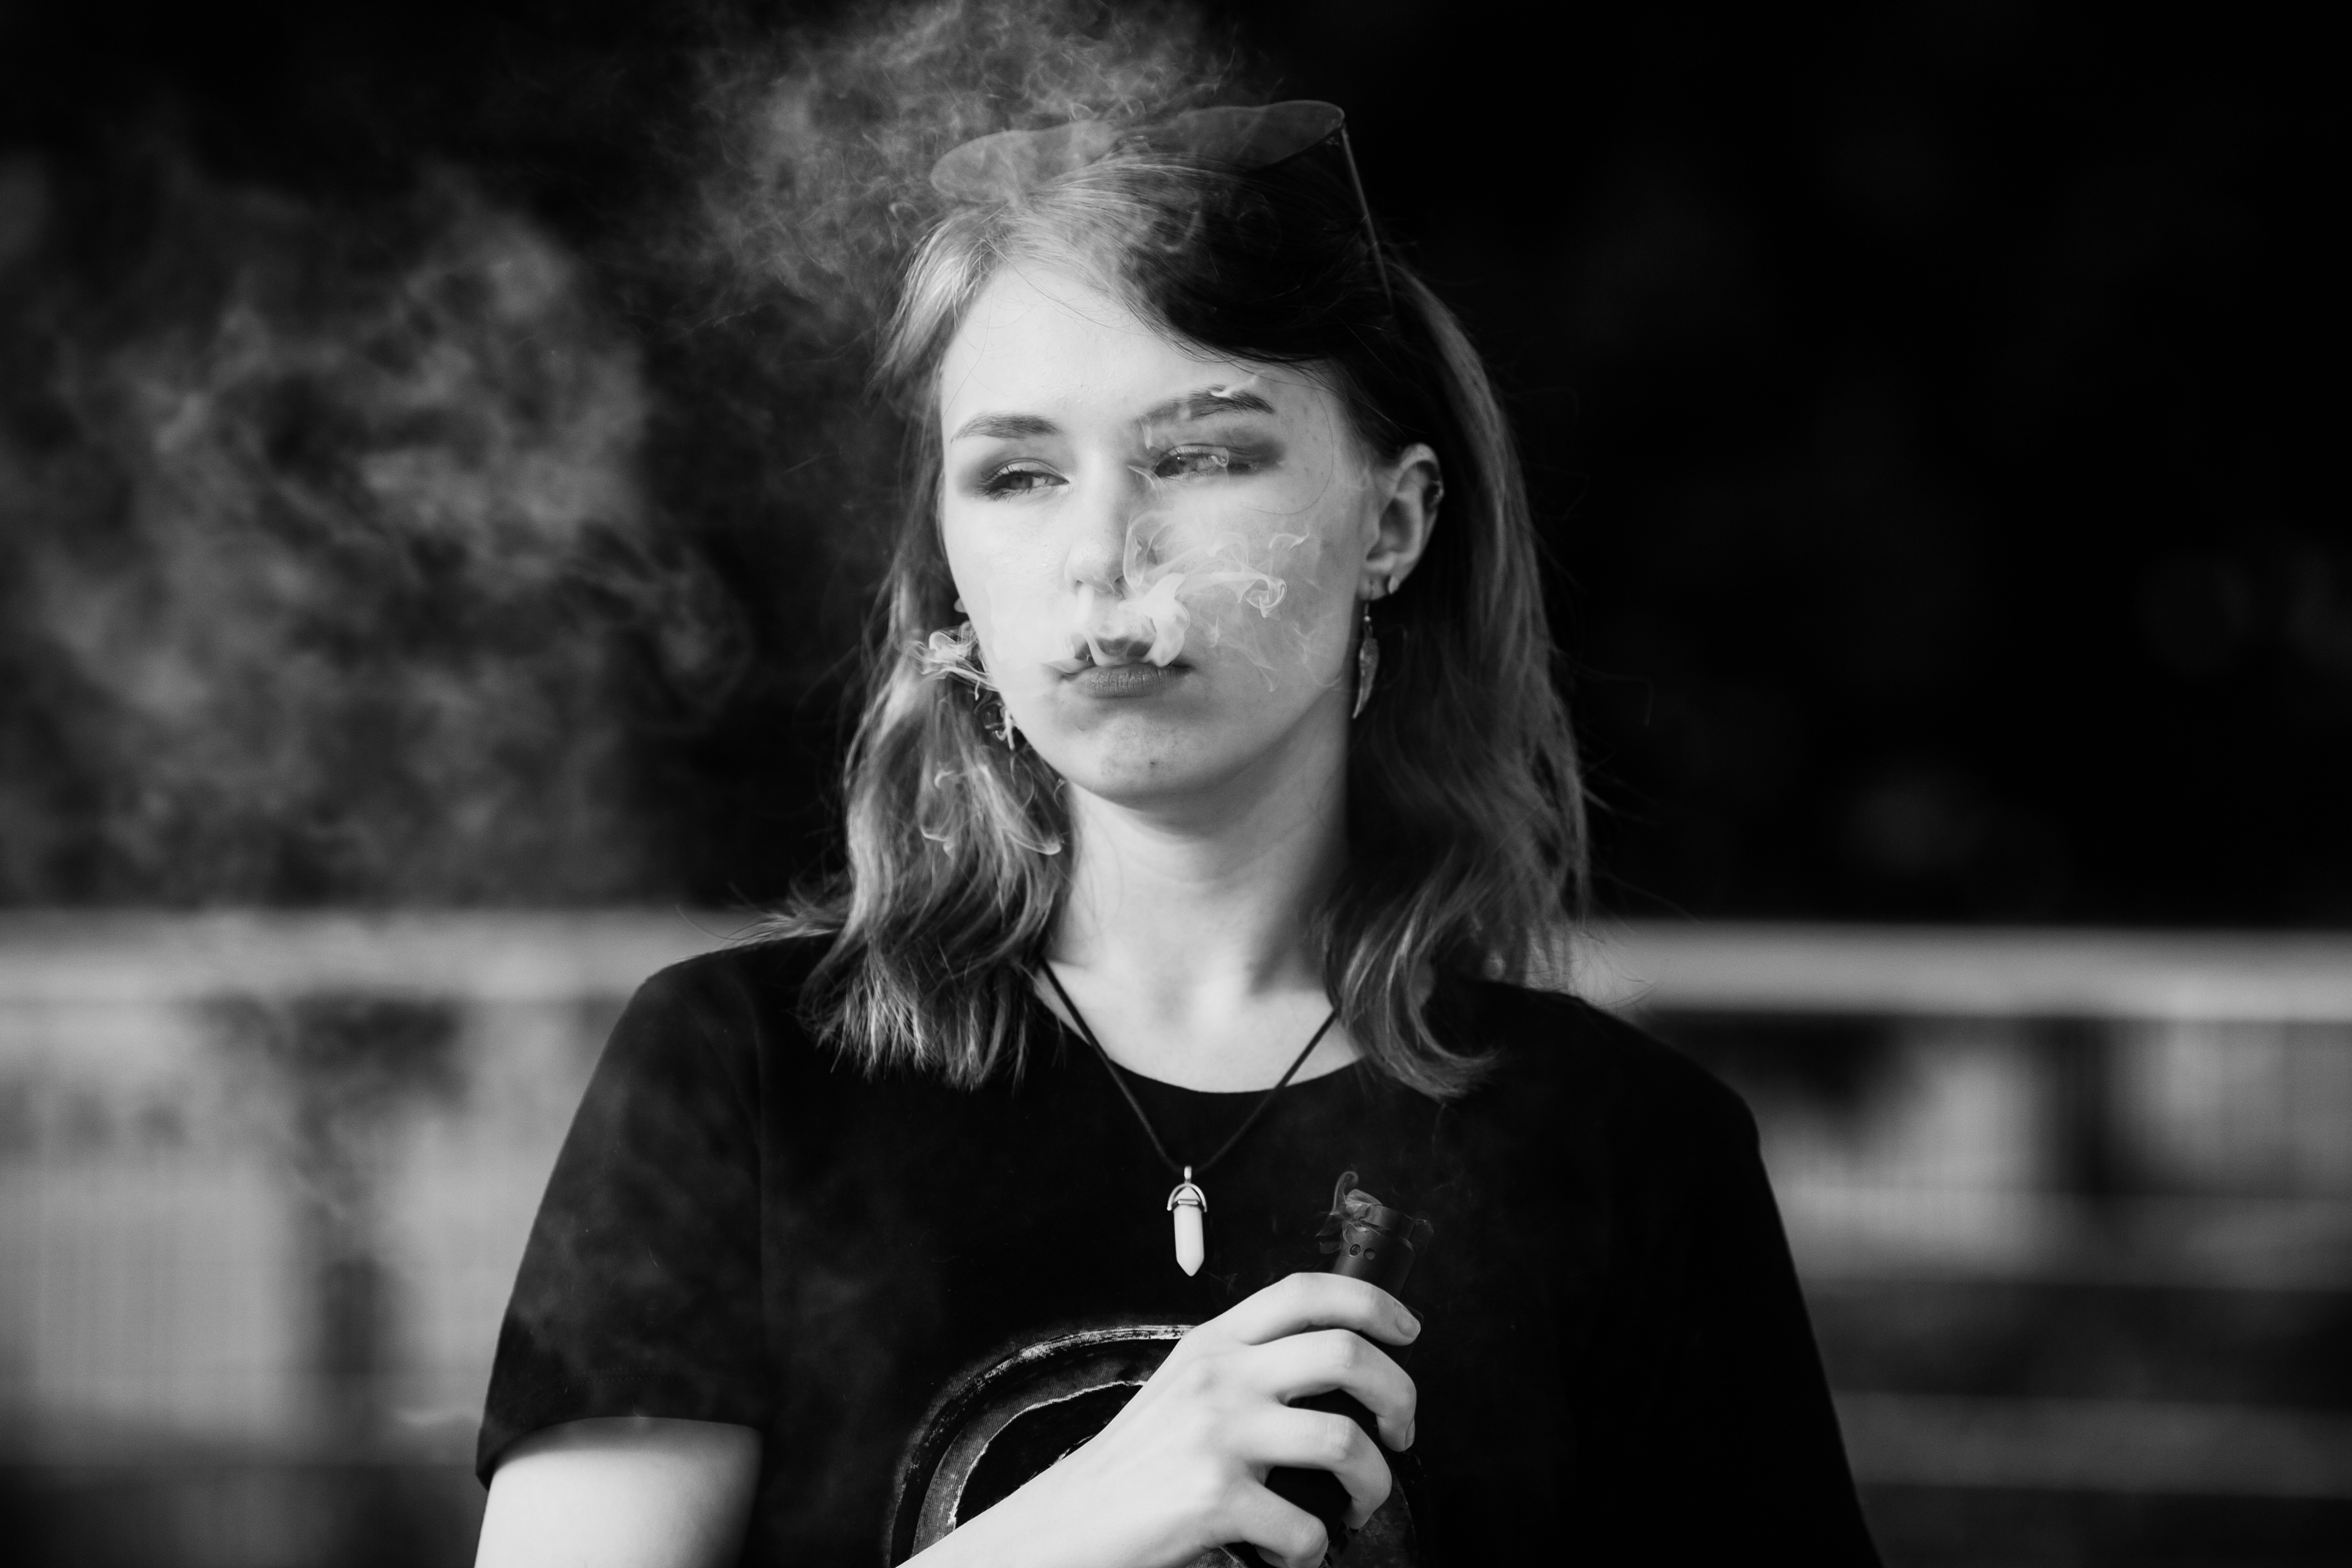 A black-and-white photo of teenaged girl vaping.